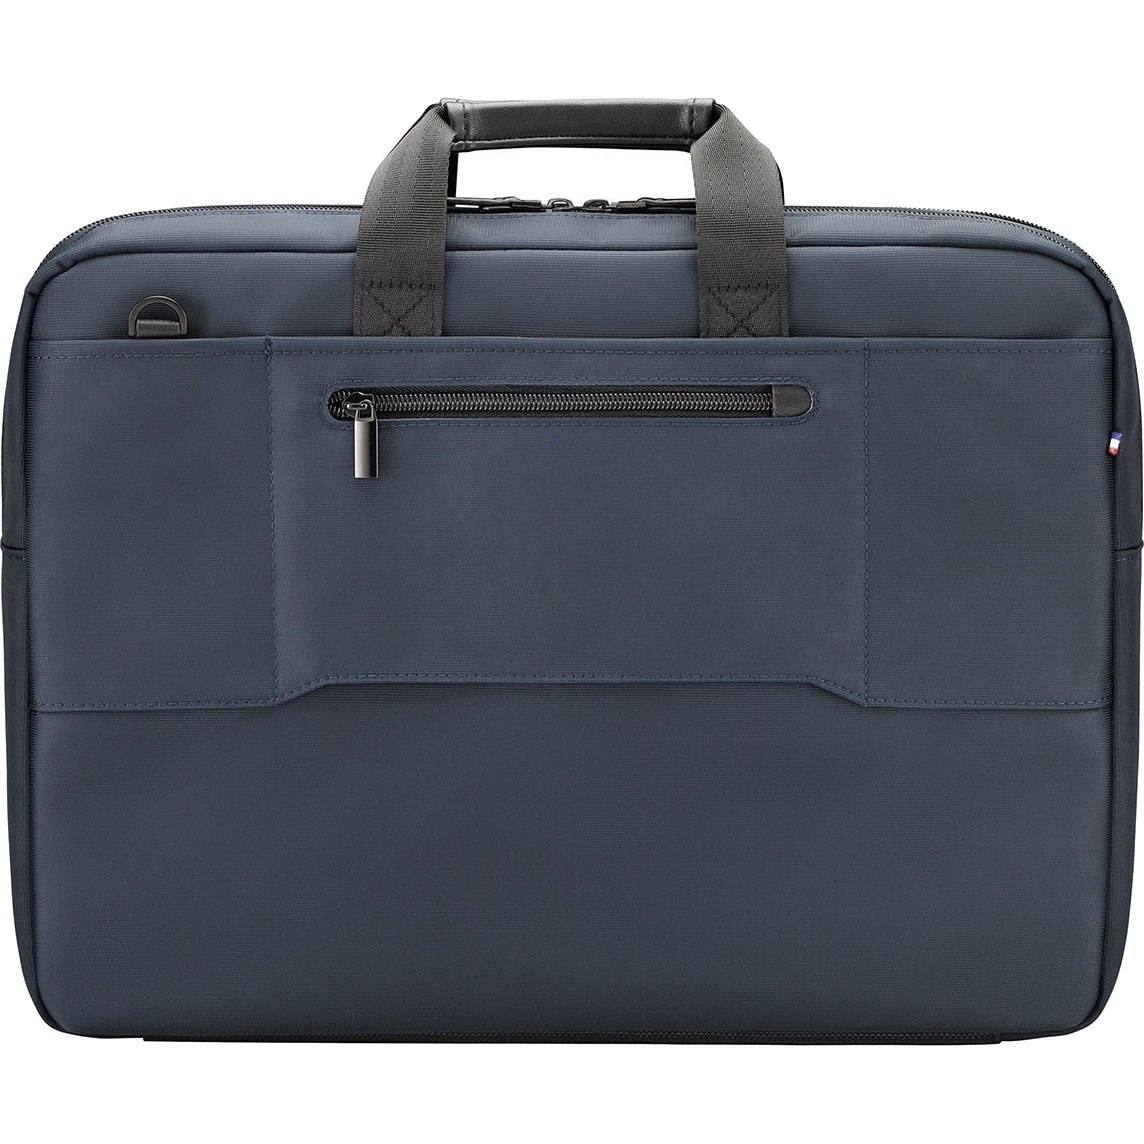 MOBILIS Executive Carrying Case (Briefcase) for 27.9 cm (11") to 35.6 cm (14") Notebook - Navy Blue, Black